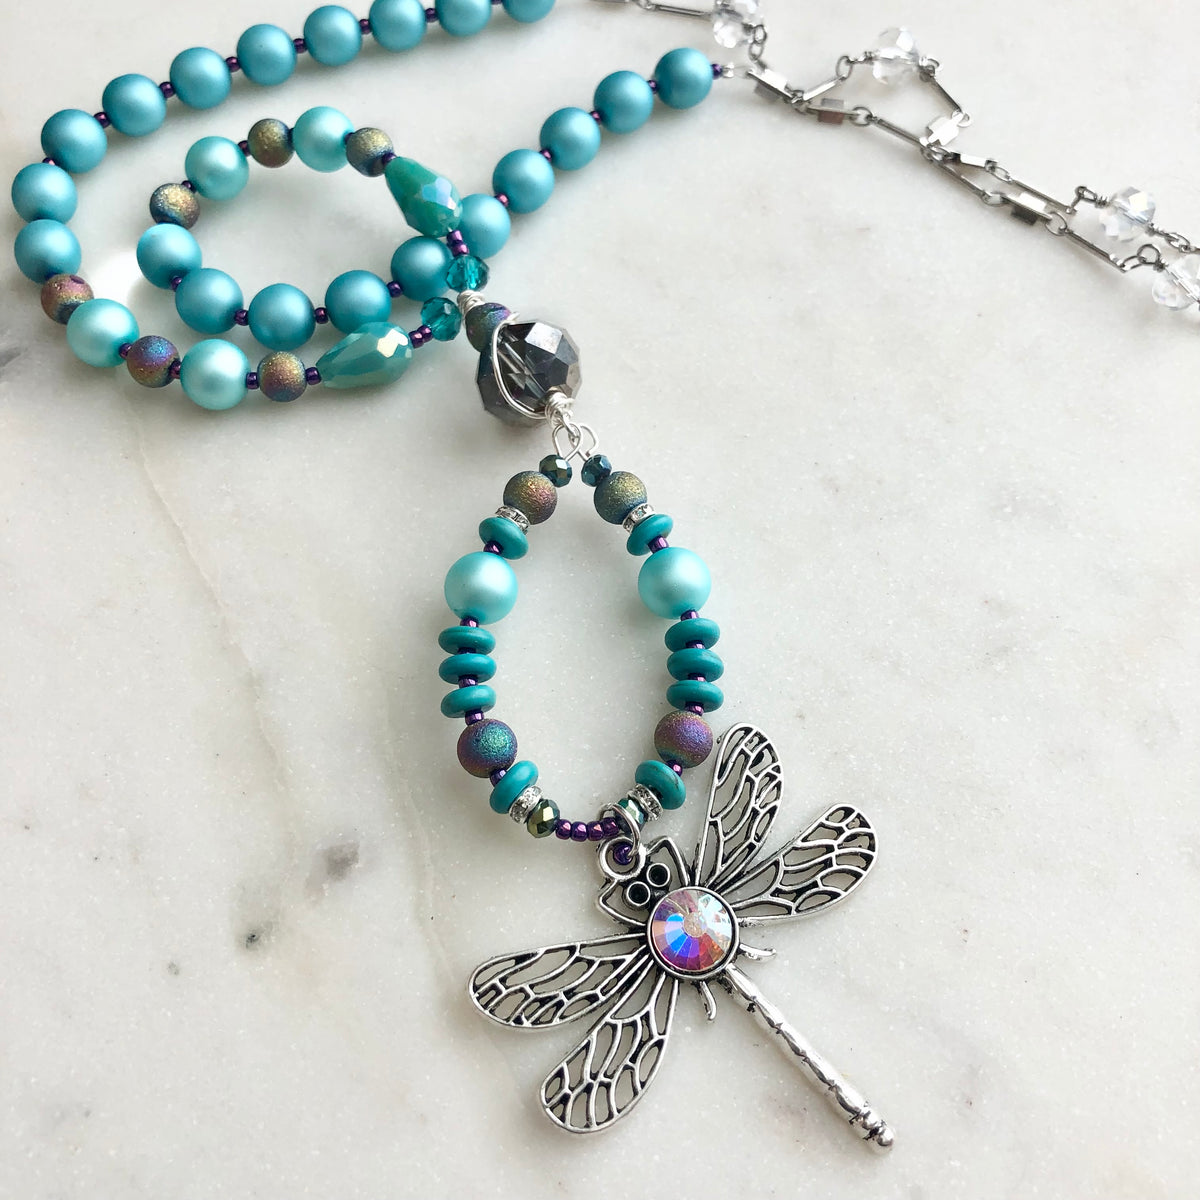 Self-Care Butterfly Bracelet with Brittany Chavers - Jesse James Beads